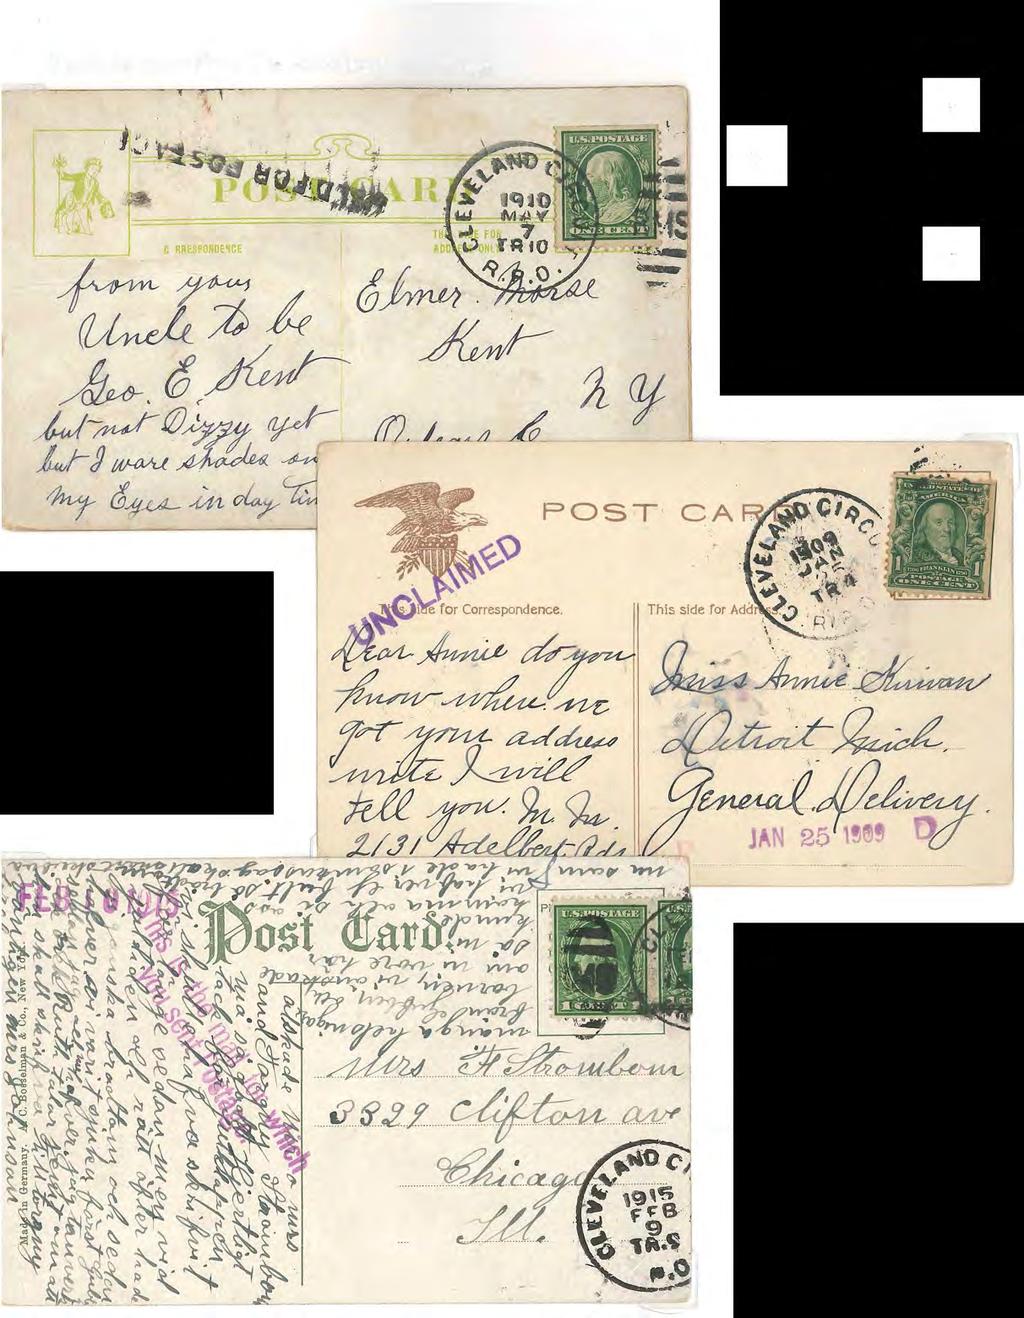 .._.._ Handstamp-First Die Auxiliary Markings I I. '. I '.., THI$ SIDE FOK 0 oo C! ONLY May 7, 1910 Trip 10 Held for Postage January 25, 1909 Trip 4 Unclaimed (at Detroit) c 4' :::-... Jd.... c. >.